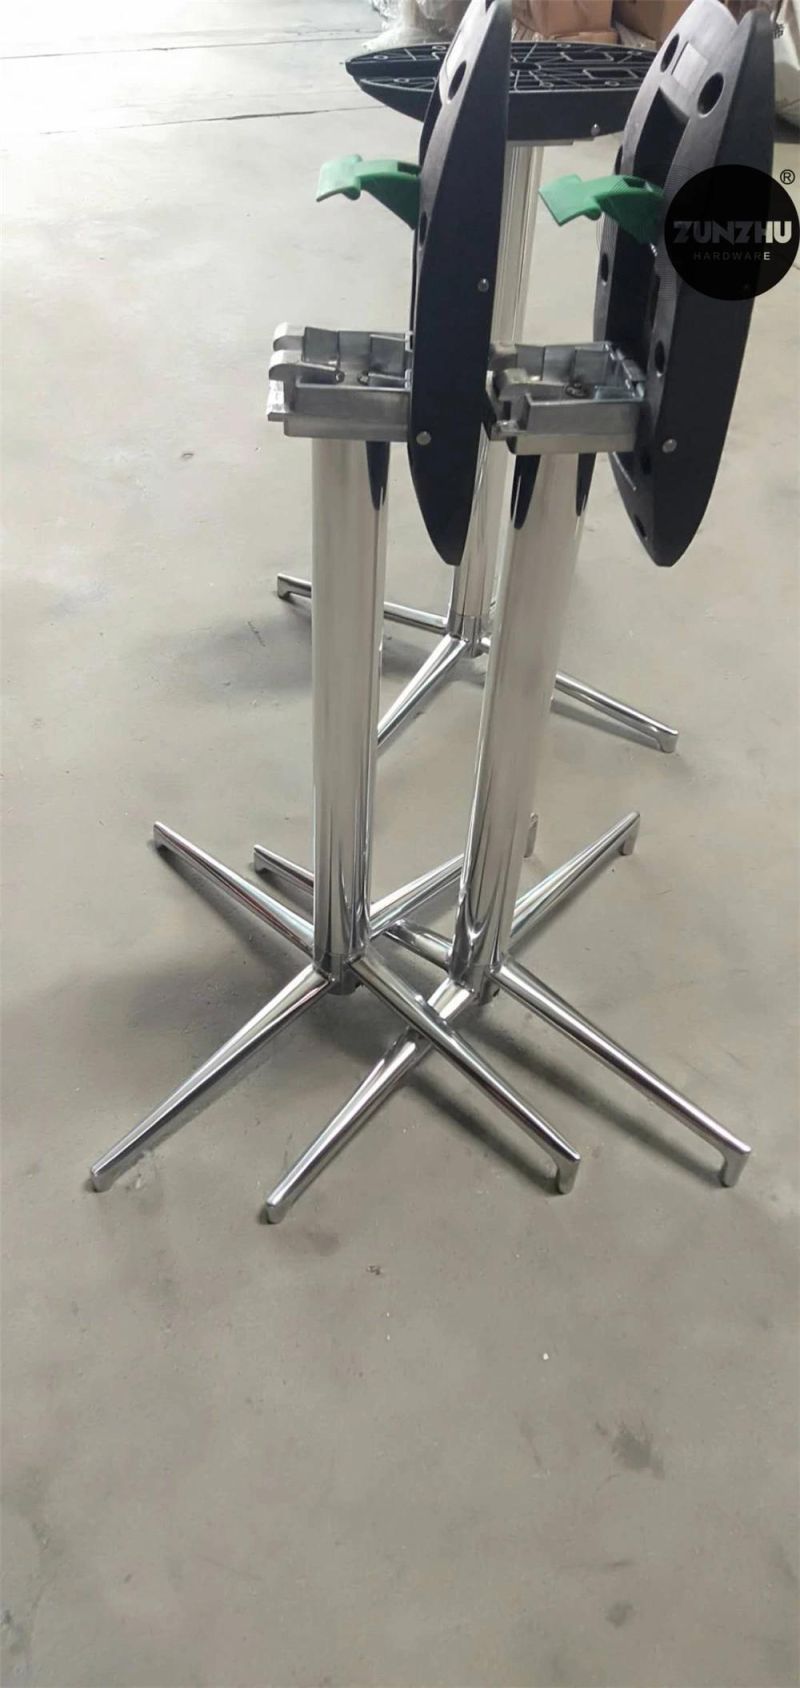 Modern Polished Cast Aluminum Table Base Folding Table Top Meetting Table Leg Metal Outdoor Restaurant Furniture Parts Office Table Base